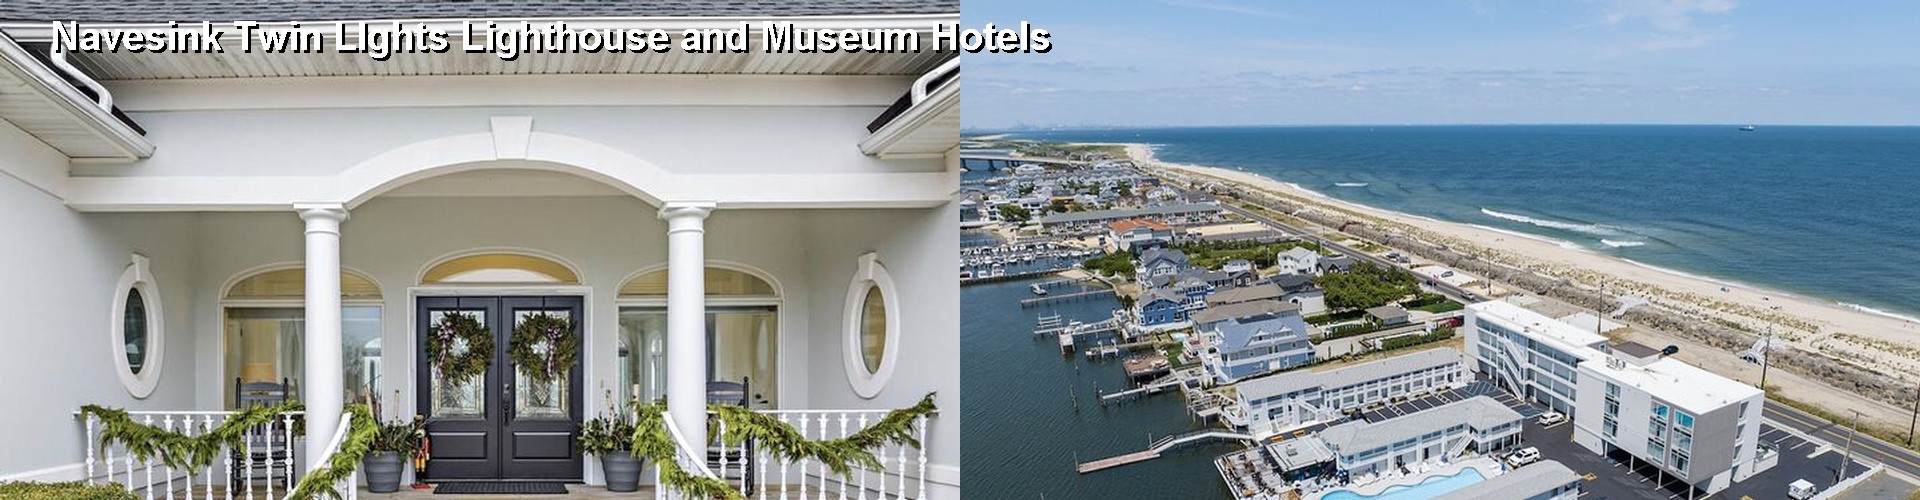 5 Best Hotels near Navesink Twin LIghts Lighthouse and Museum